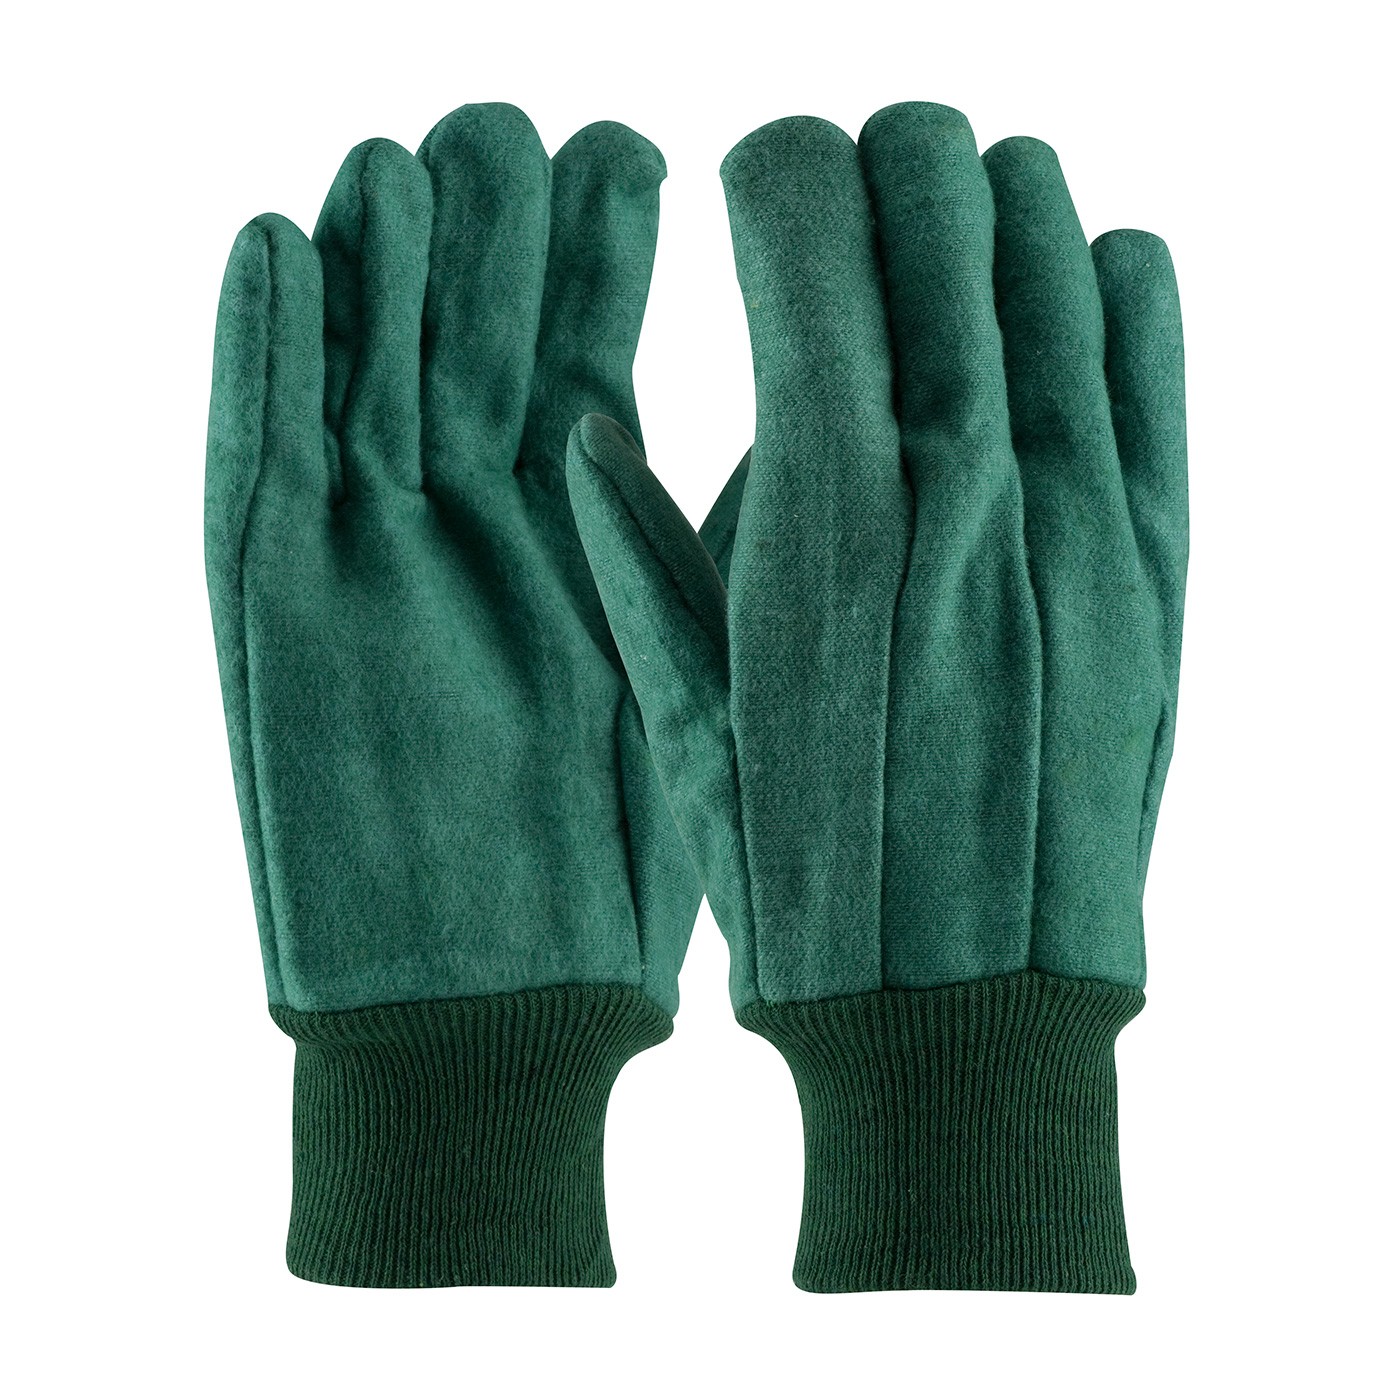 PIP® Premium Grade Cotton Chore Glove with Double Layer Palm/Back and Nap-out Finish - Knit Wrist  (#93-548)